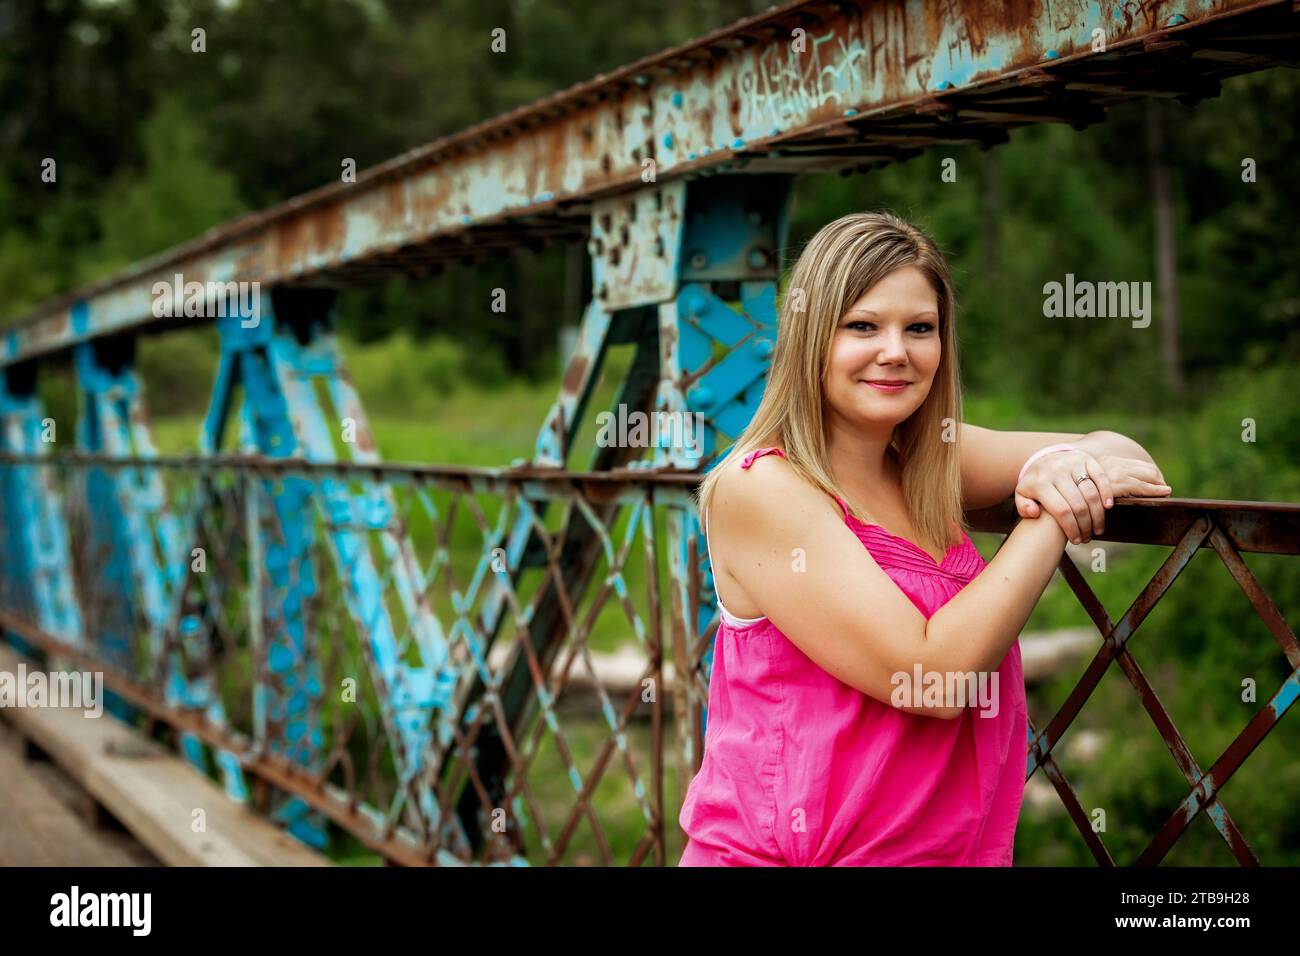 Close-up portrait of a woman standing on a trestle bridge during a nature walk in a park, posing for the camera; Edmonton, Alberta, Canada Stock Photo